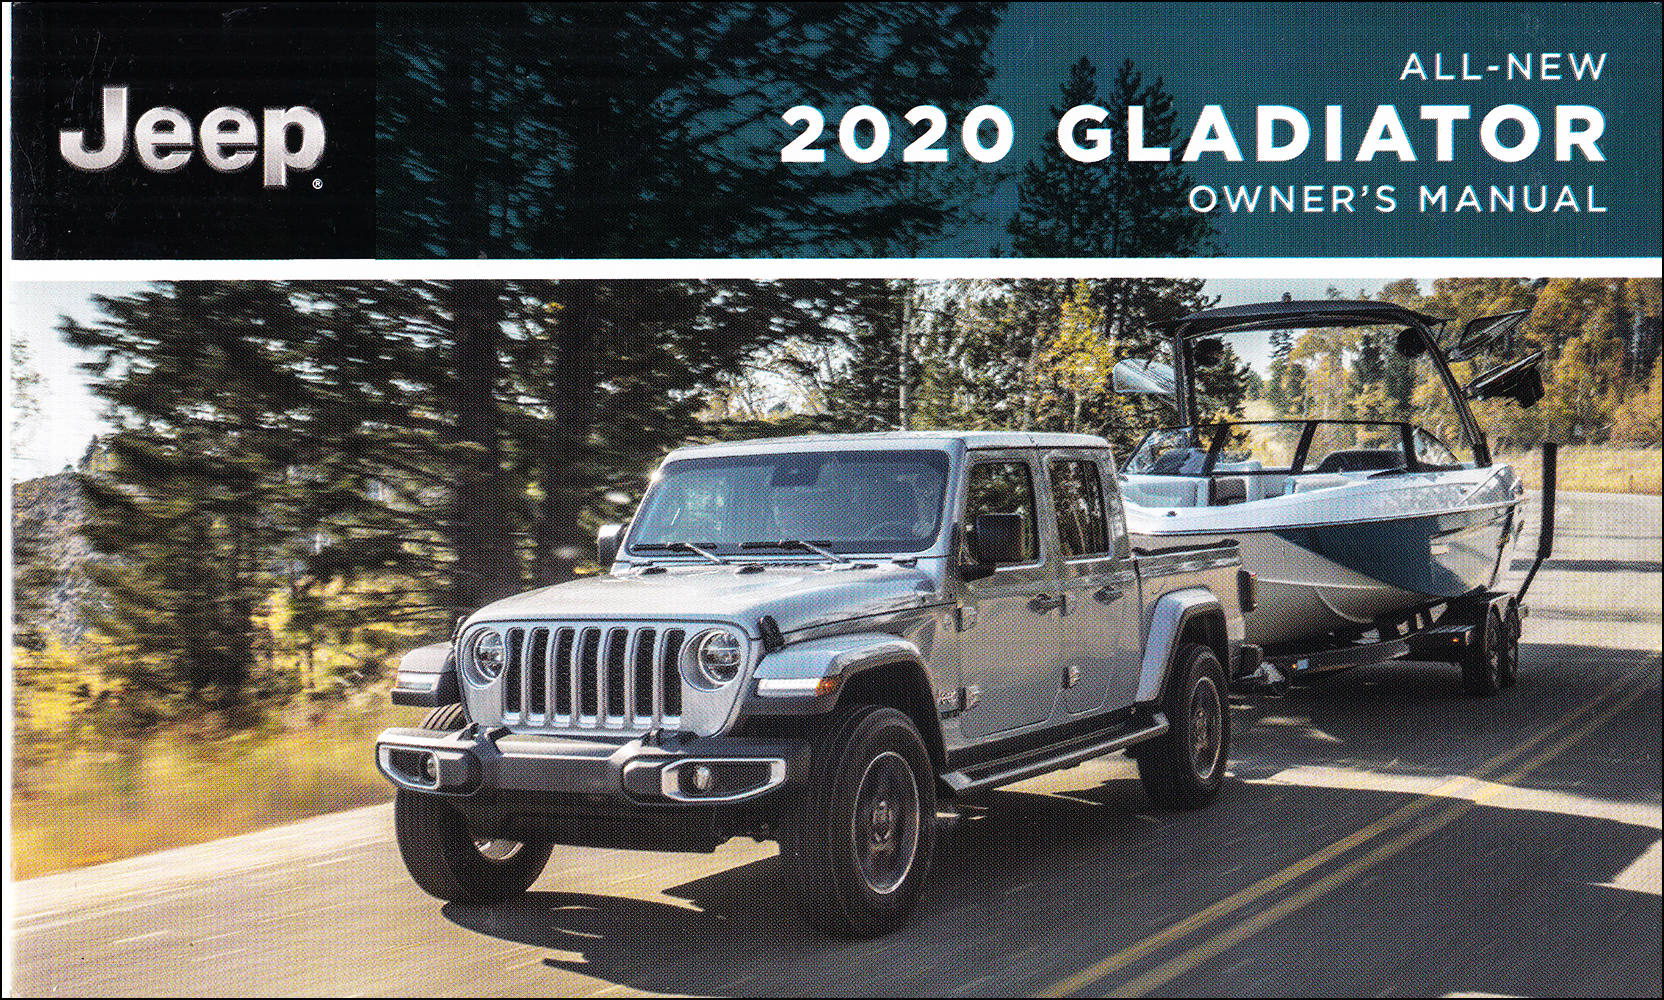 2020 Jeep Gladiator Owner's Manual Original Extended 474-page version